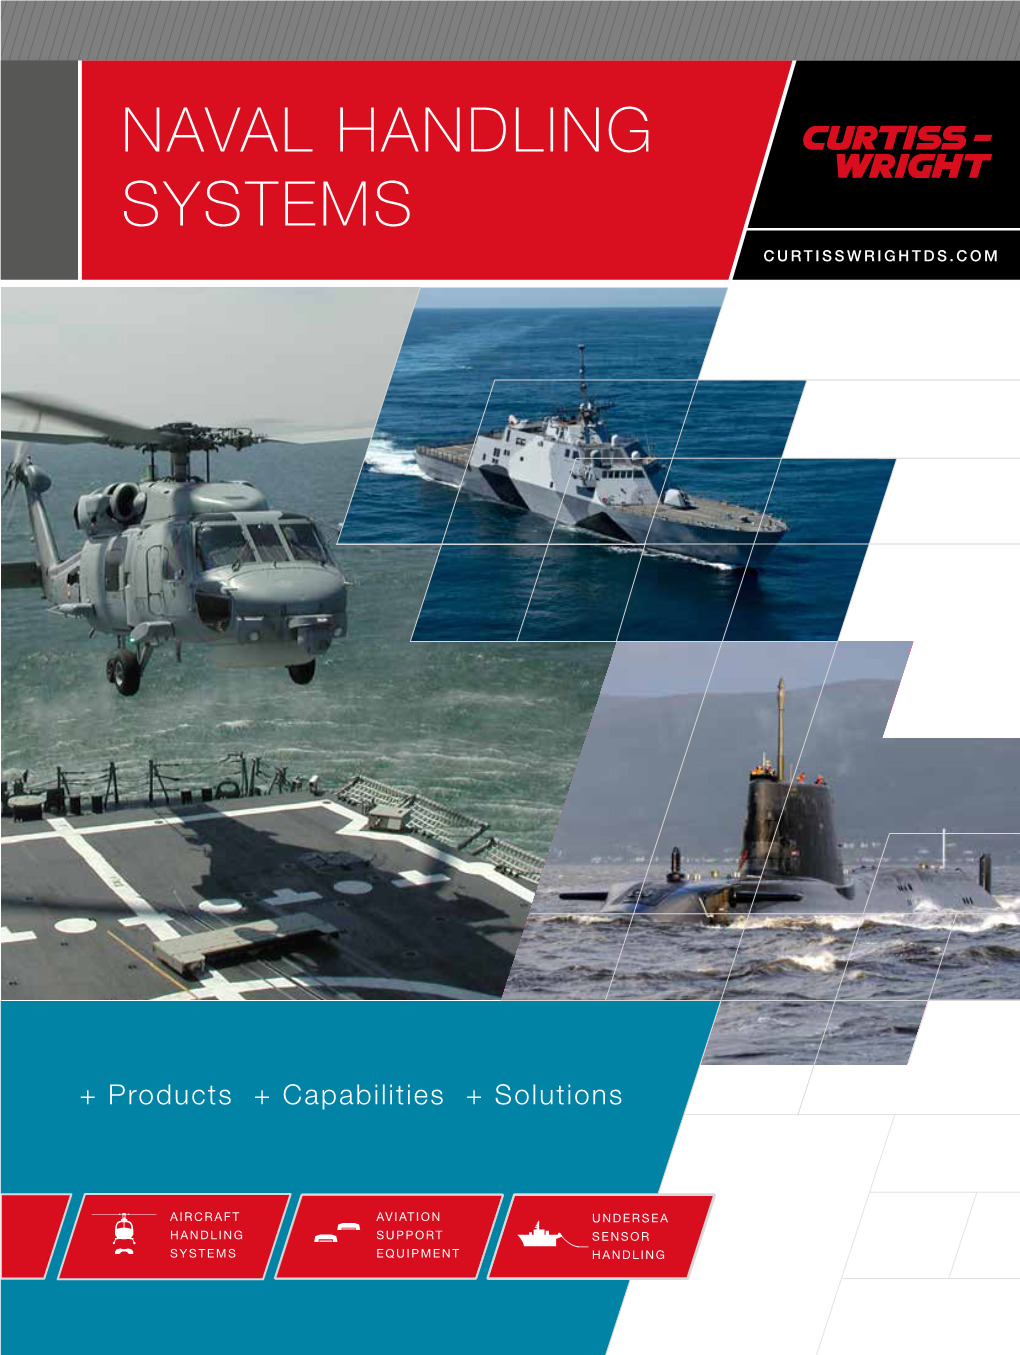 Naval Handling Systems Curtisswrightds.Com